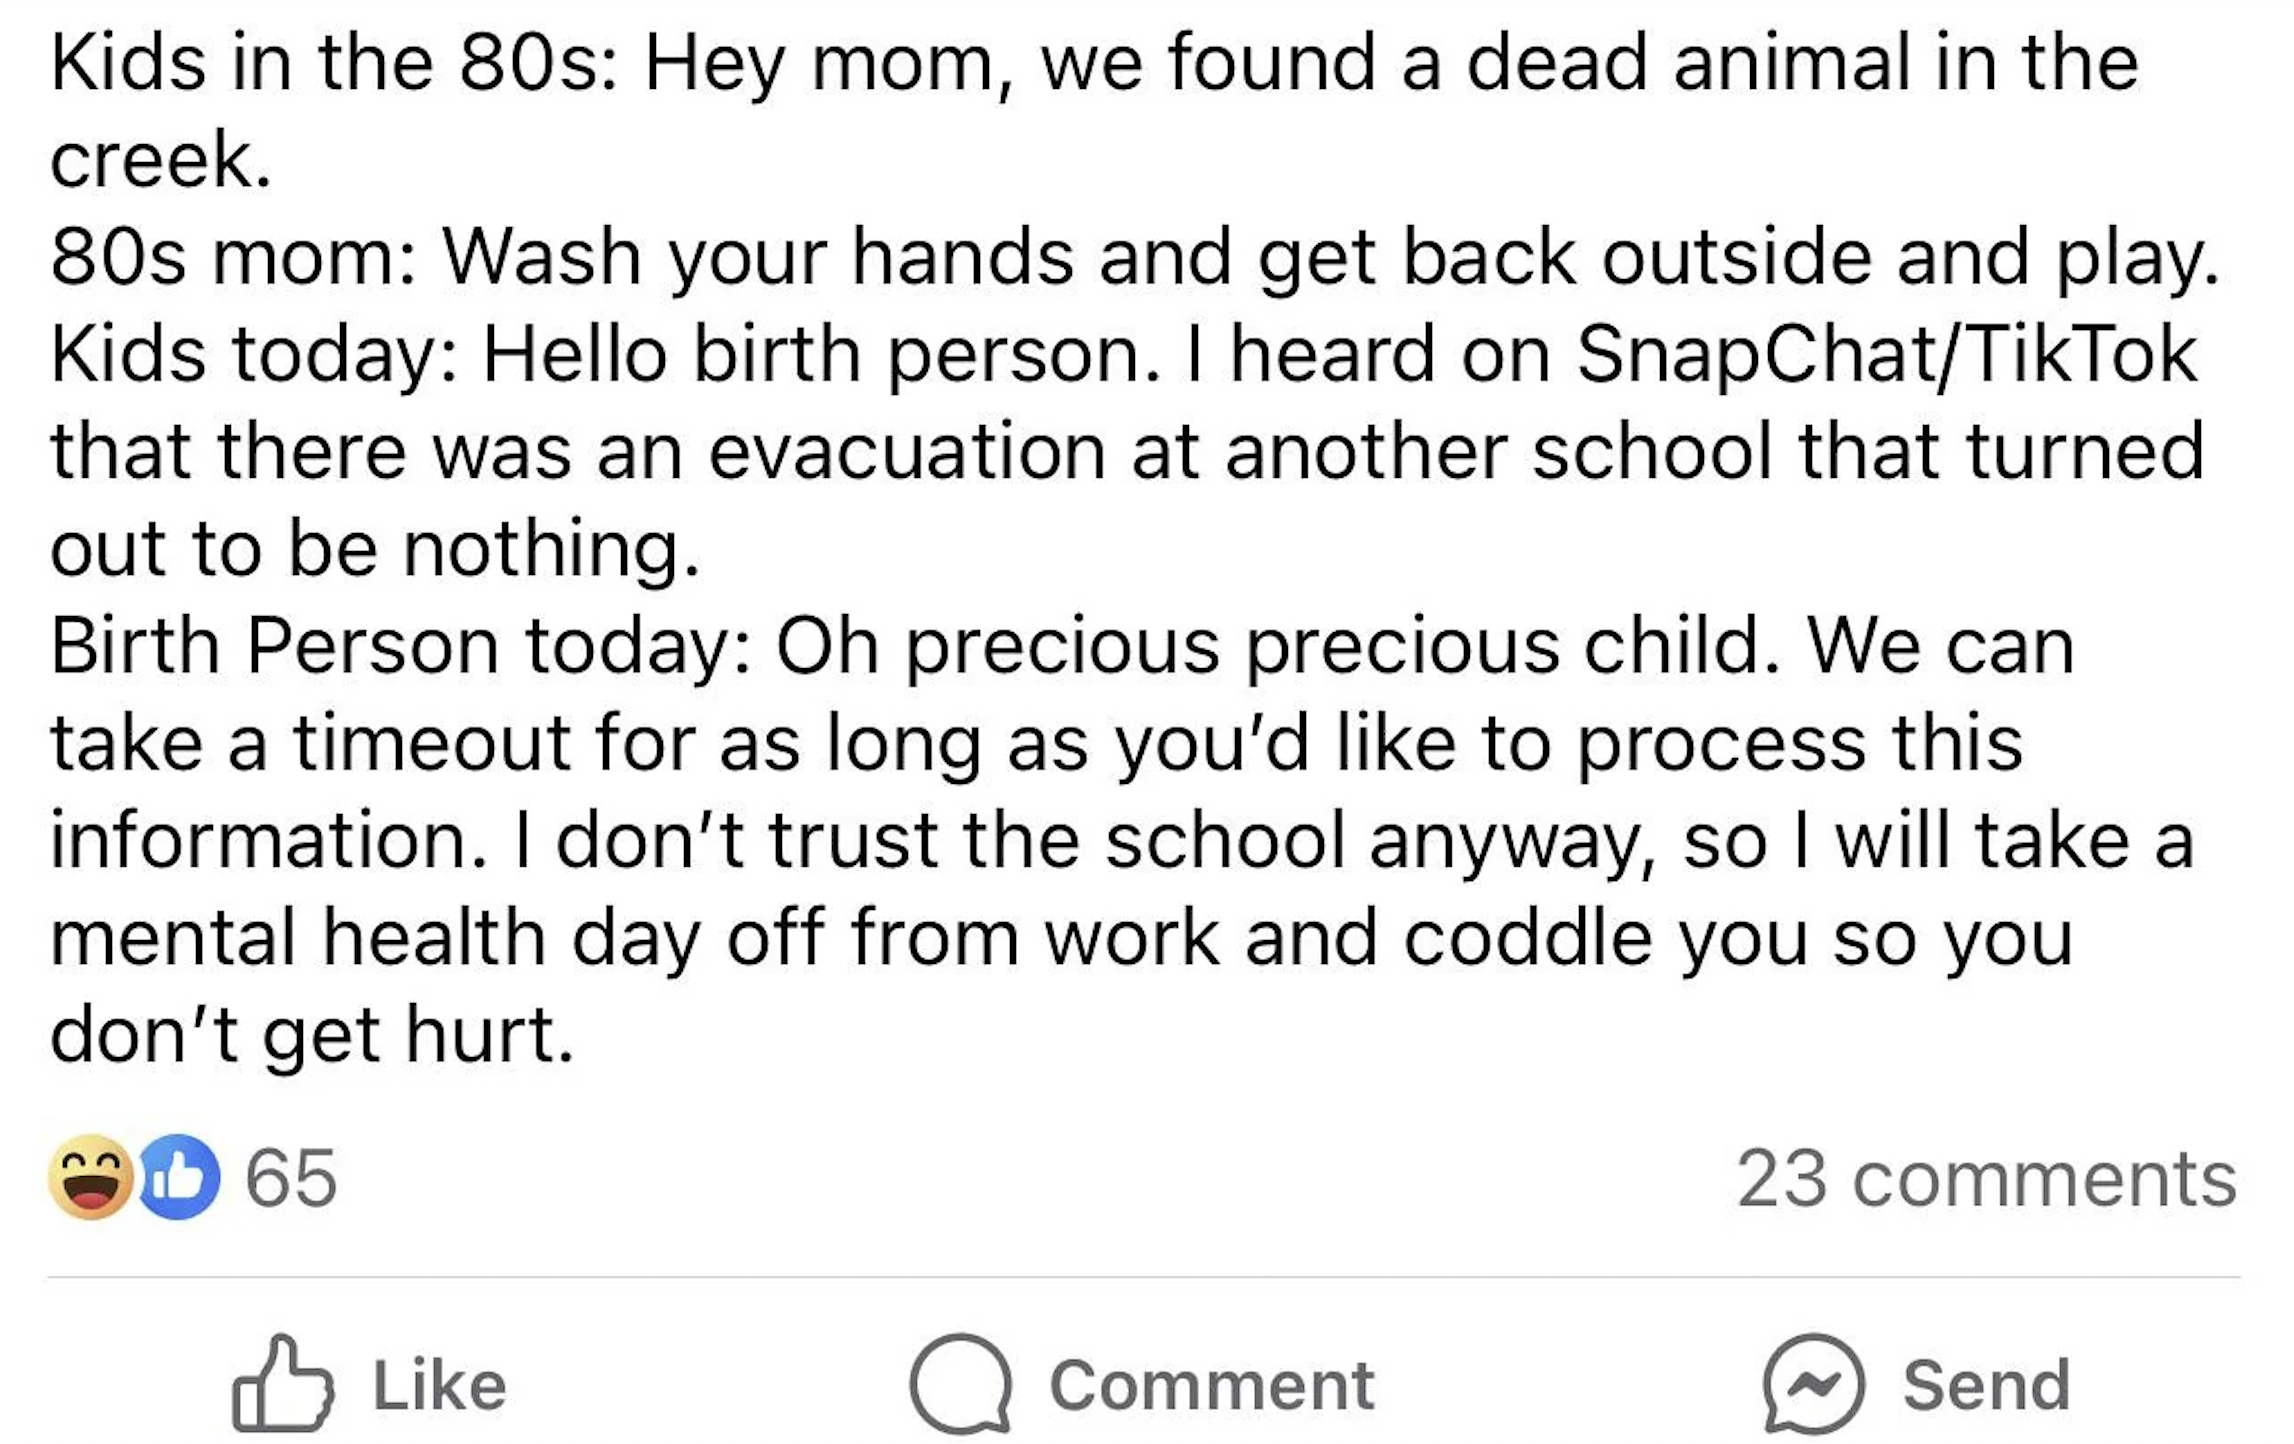 screenshot - Kids in the 80s Hey mom, we found a dead animal in the creek. 80s mom Wash your hands and get back outside and play. Kids today Hello birth person. I heard on SnapChatTikTok that there was an evacuation at another school that turned out to be